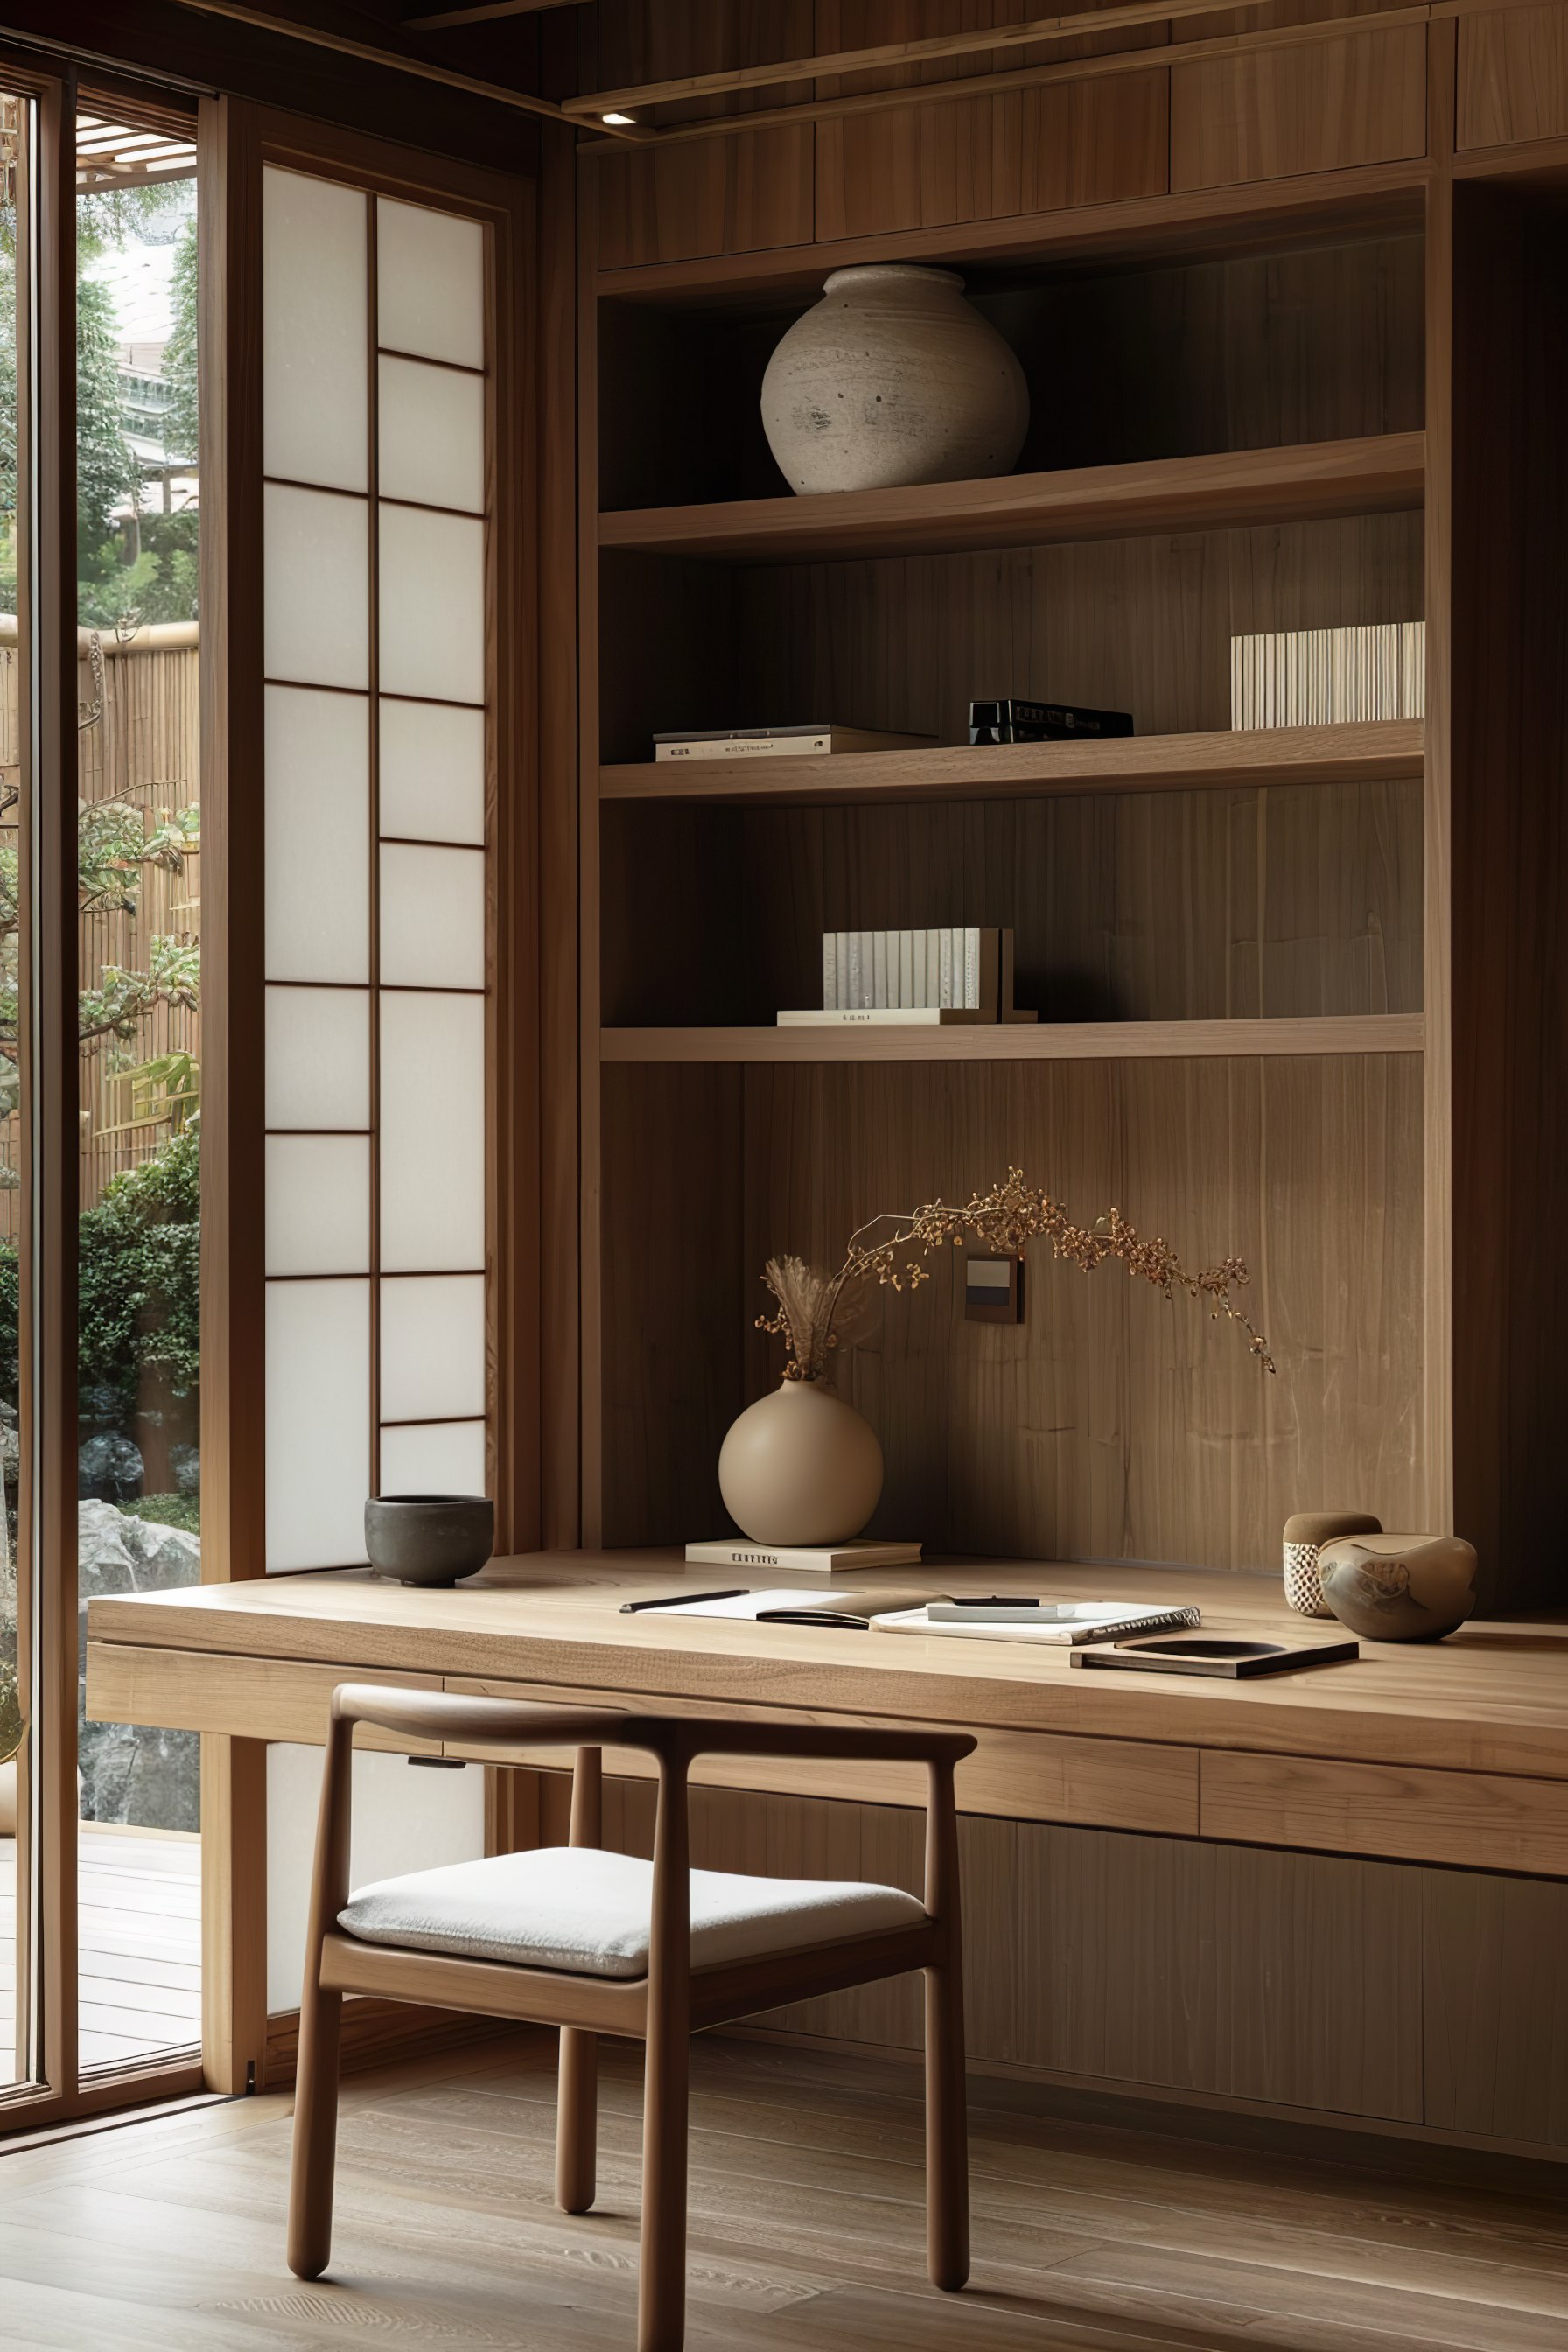 A serene study room with a wooden desk, chair, shelving, and traditional Japanese sliding door, with decorative items and books.